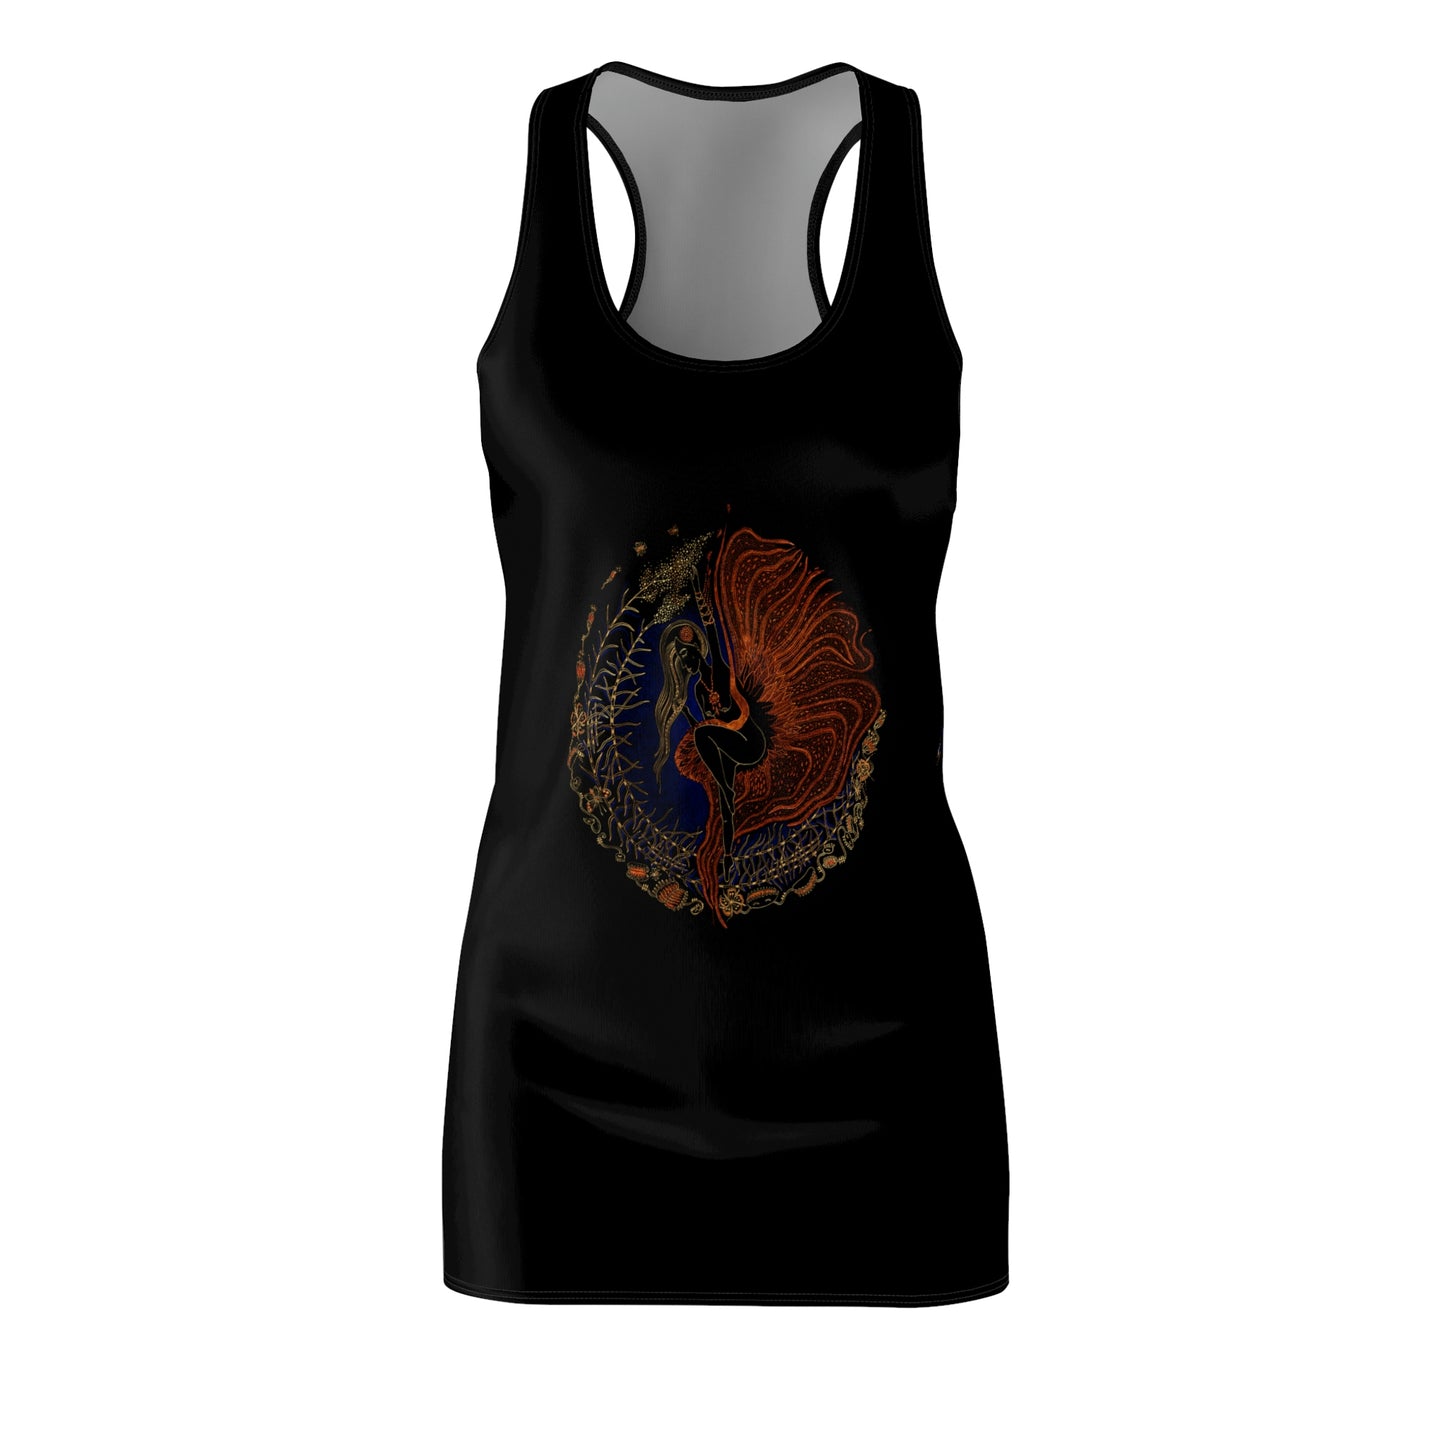 Chinese Zodiac Sign Dress (Rooster)